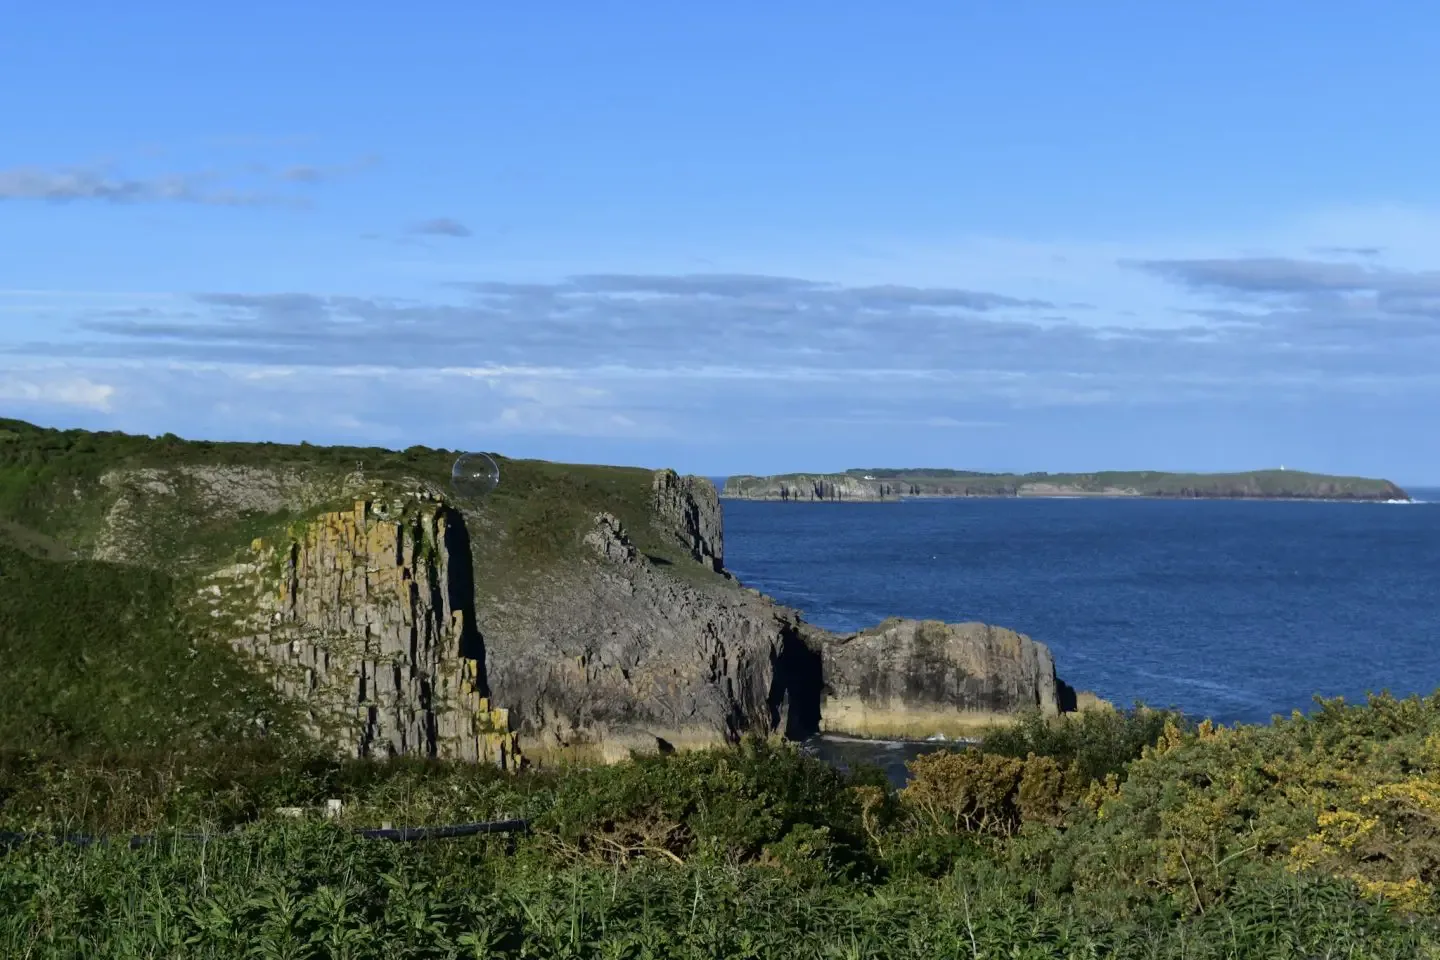 The beautiful coastline of Pembrokeshire with the rugged cliffs and picturesque views